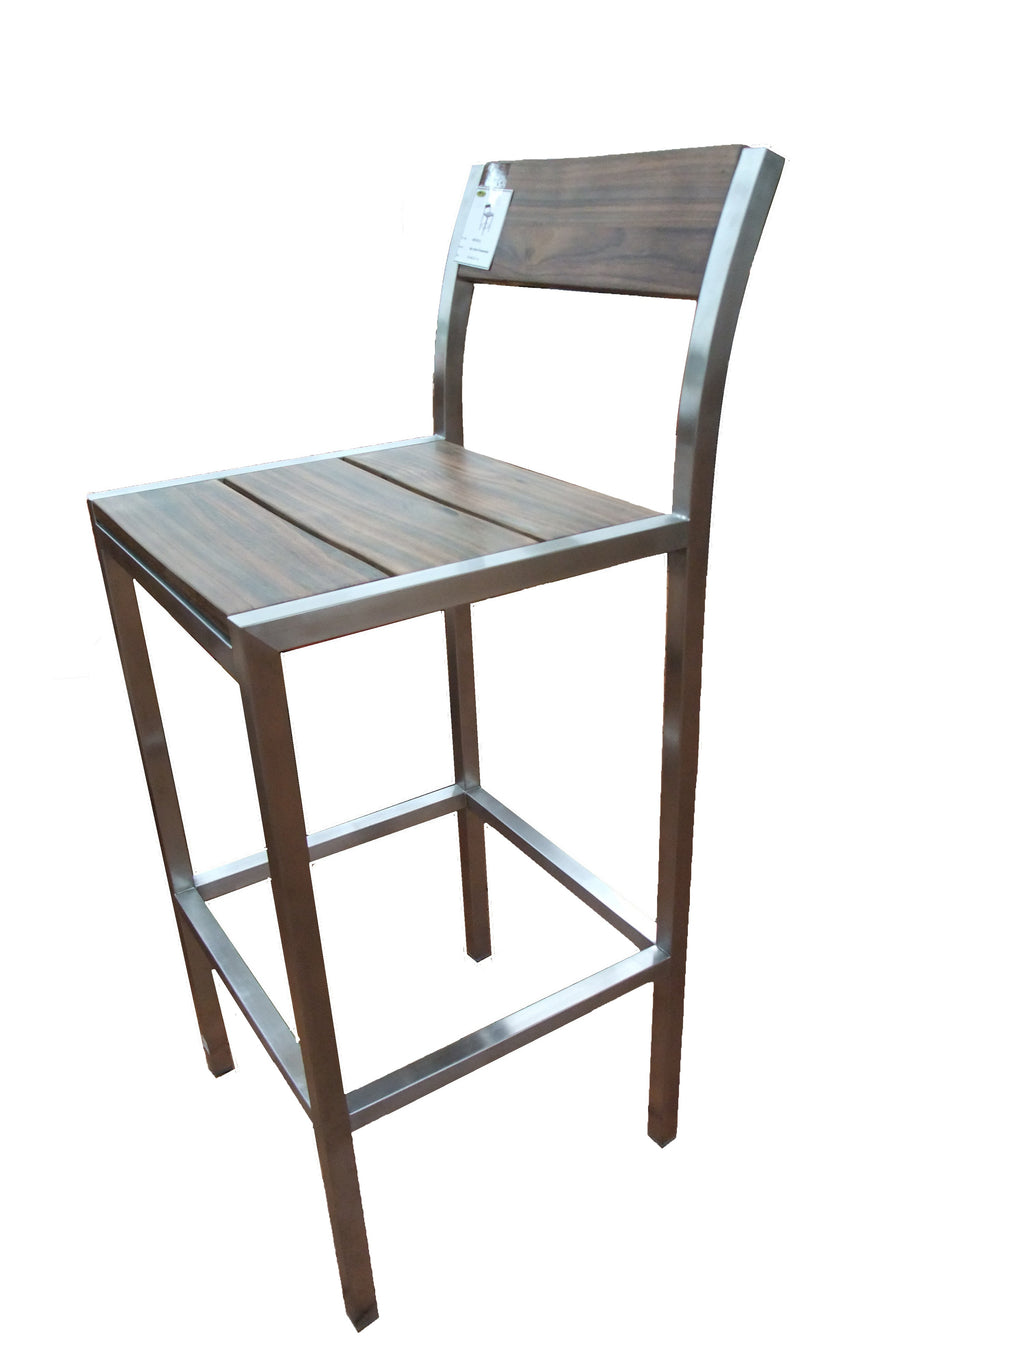 Simple but elegant rosewood bar high chairs, 304 stain steel, its durable to use indoors or outdoors. Match with Titan Arus Bar Table.